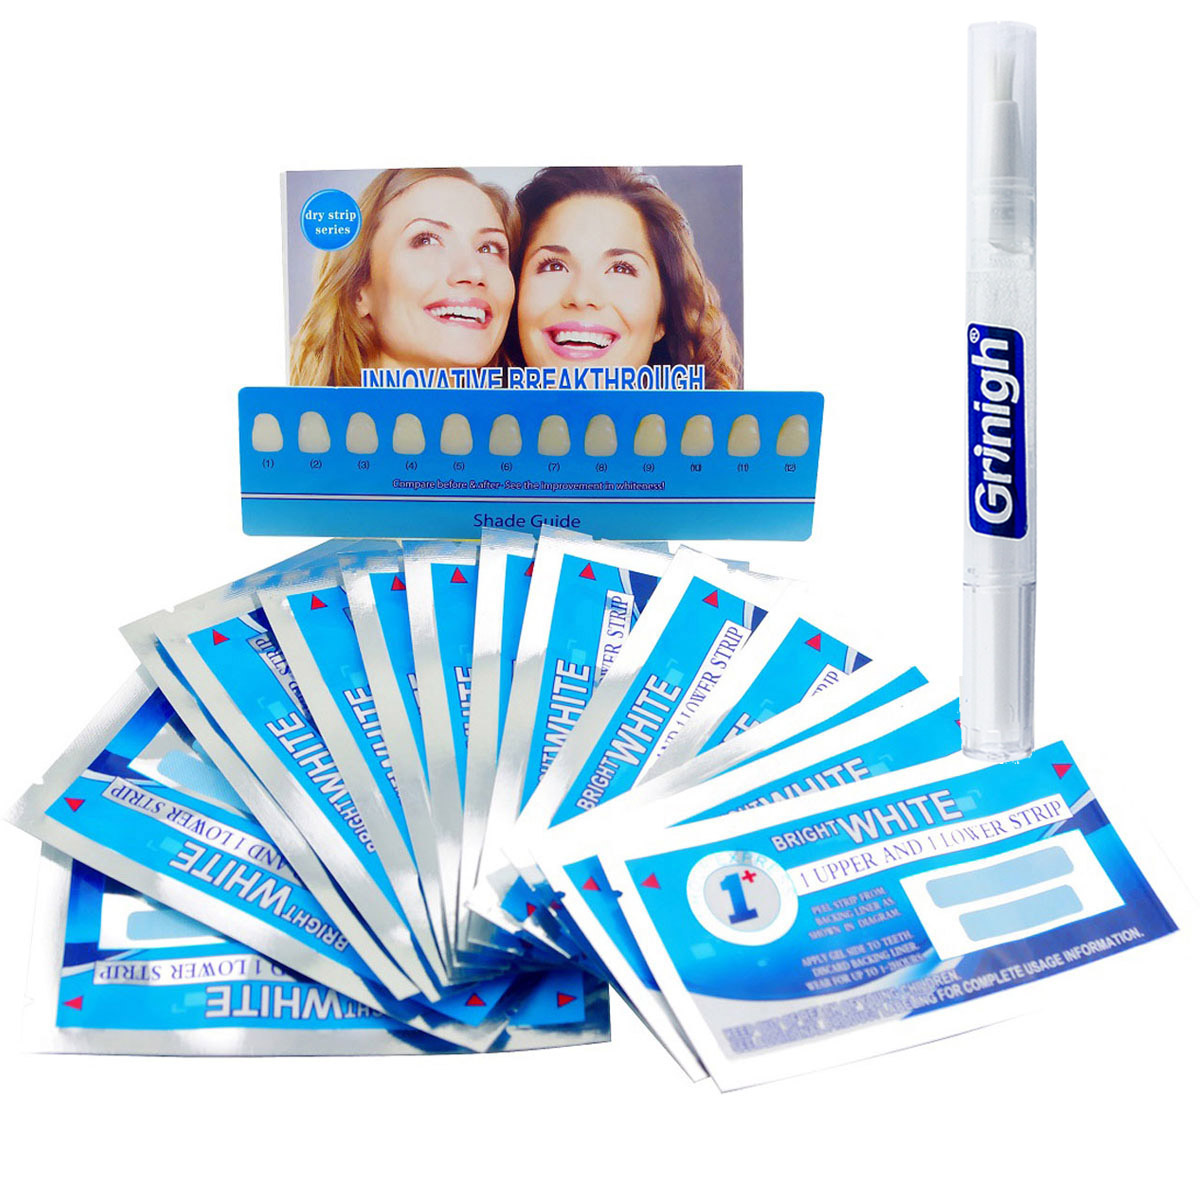 Grin365 Ultra Thin Teeth Whitening Strips with Fresh Mint Flavor - 7 Day Treatment Course